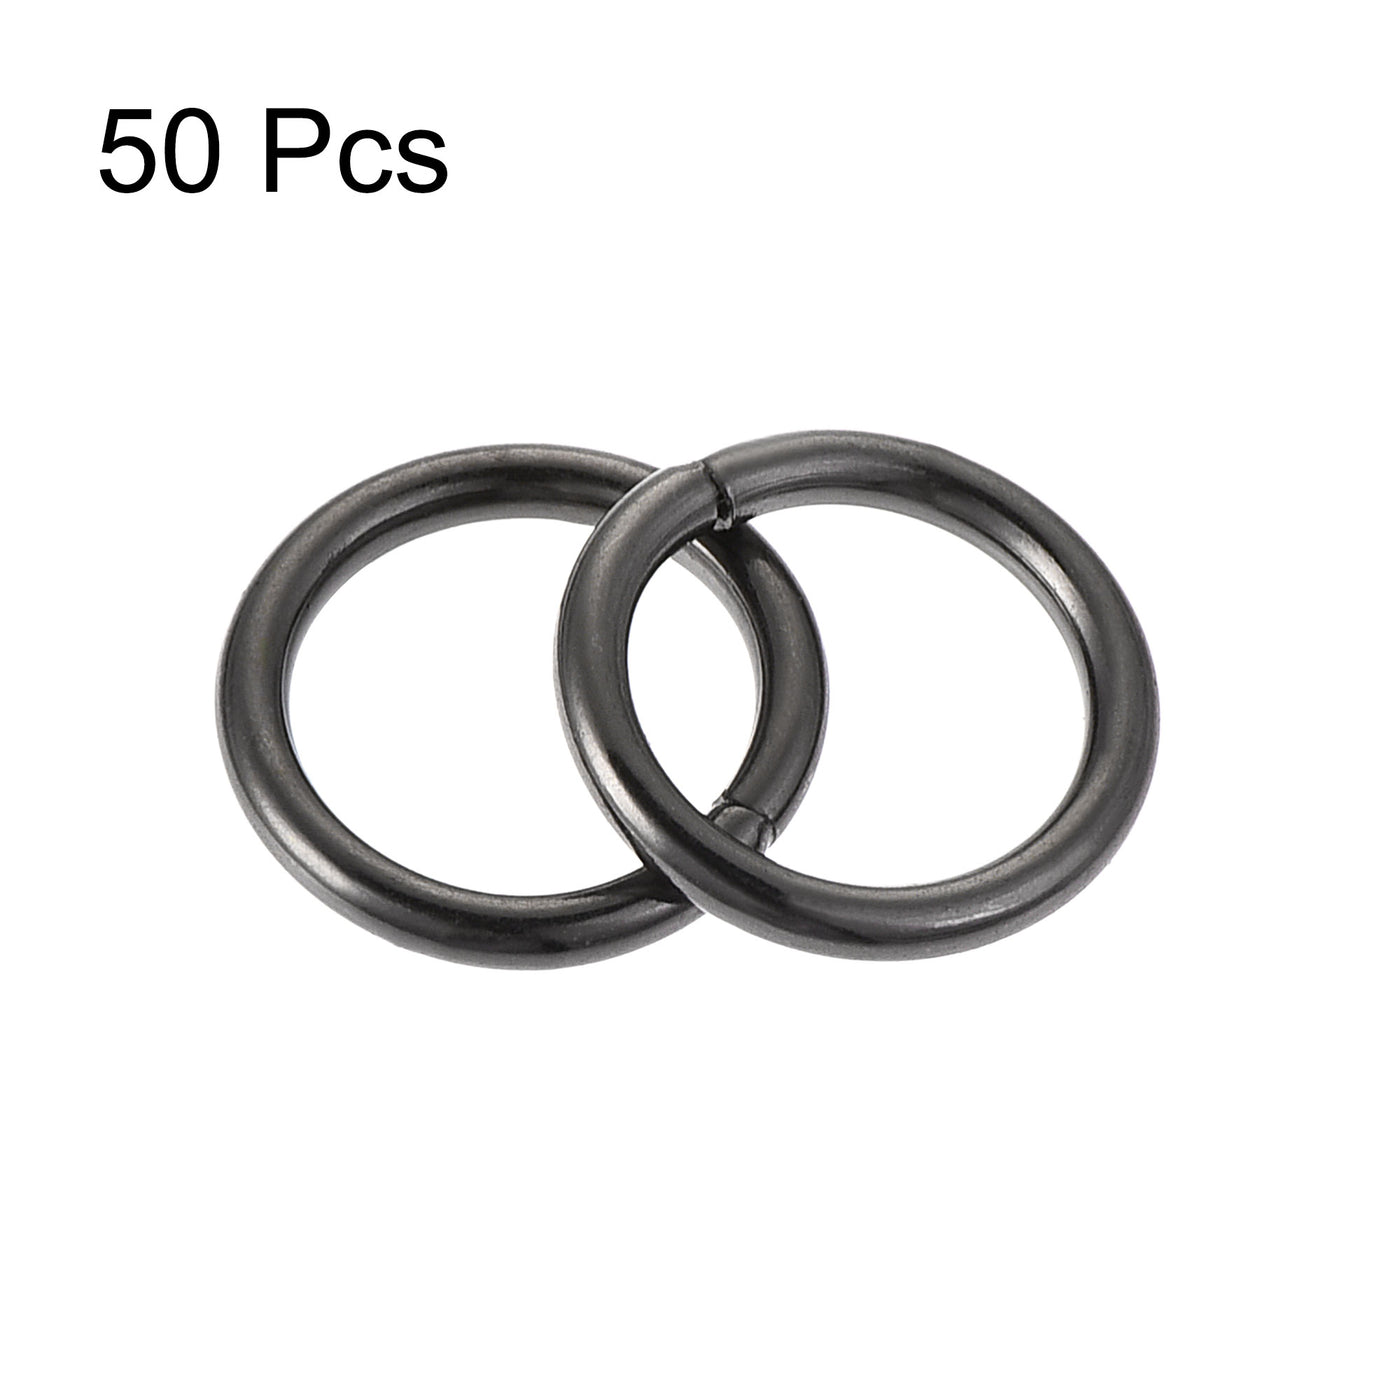 uxcell Uxcell 10mm Metal O Rings Non-Welded for Straps Bags Belts DIY Black 50pcs